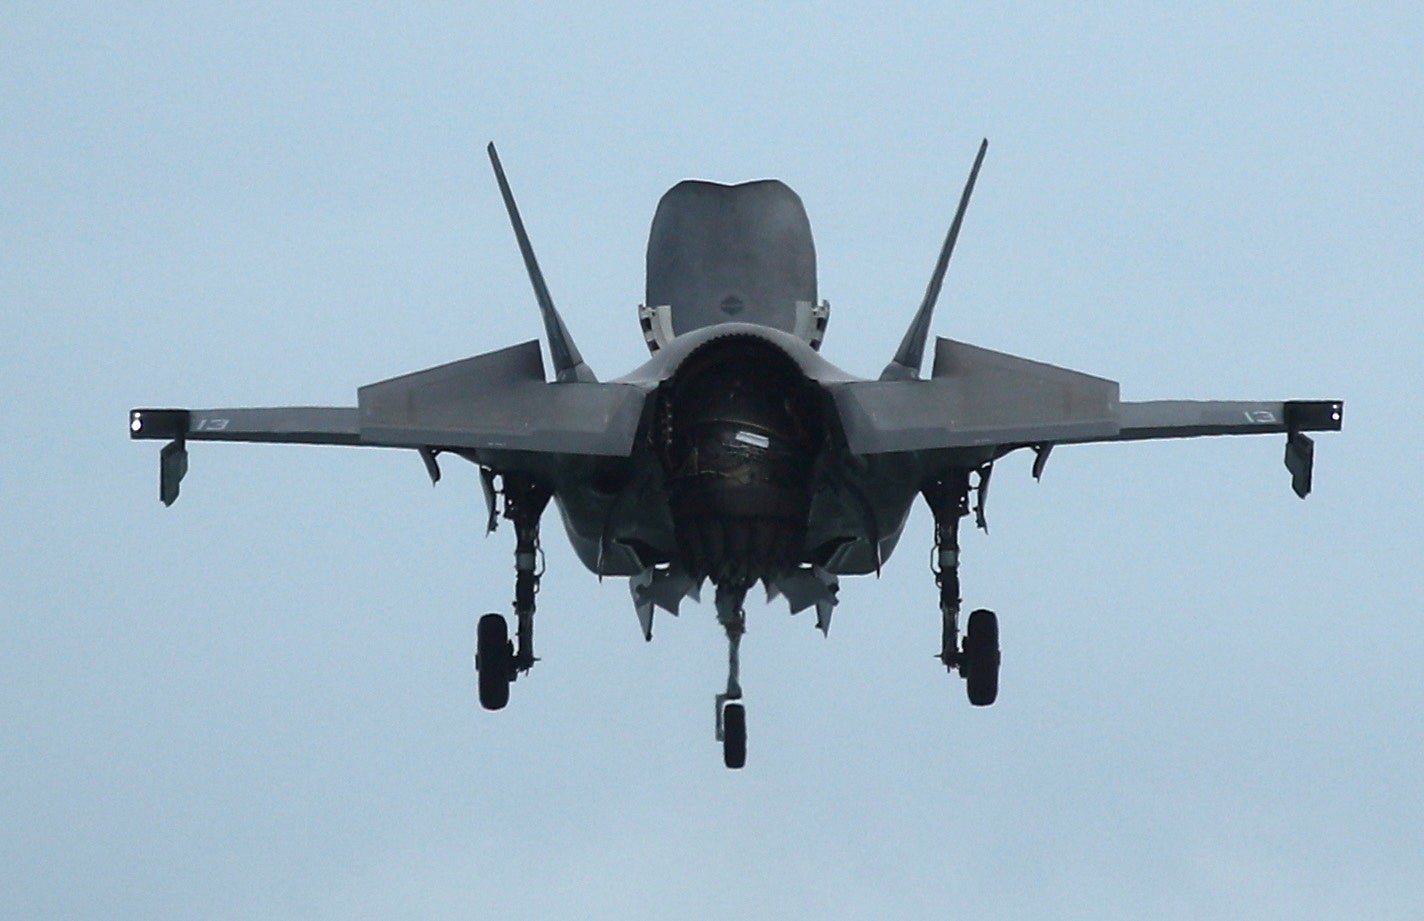 US Marine Corps F-35B Joint Strike Fighter hovers in an aerial display